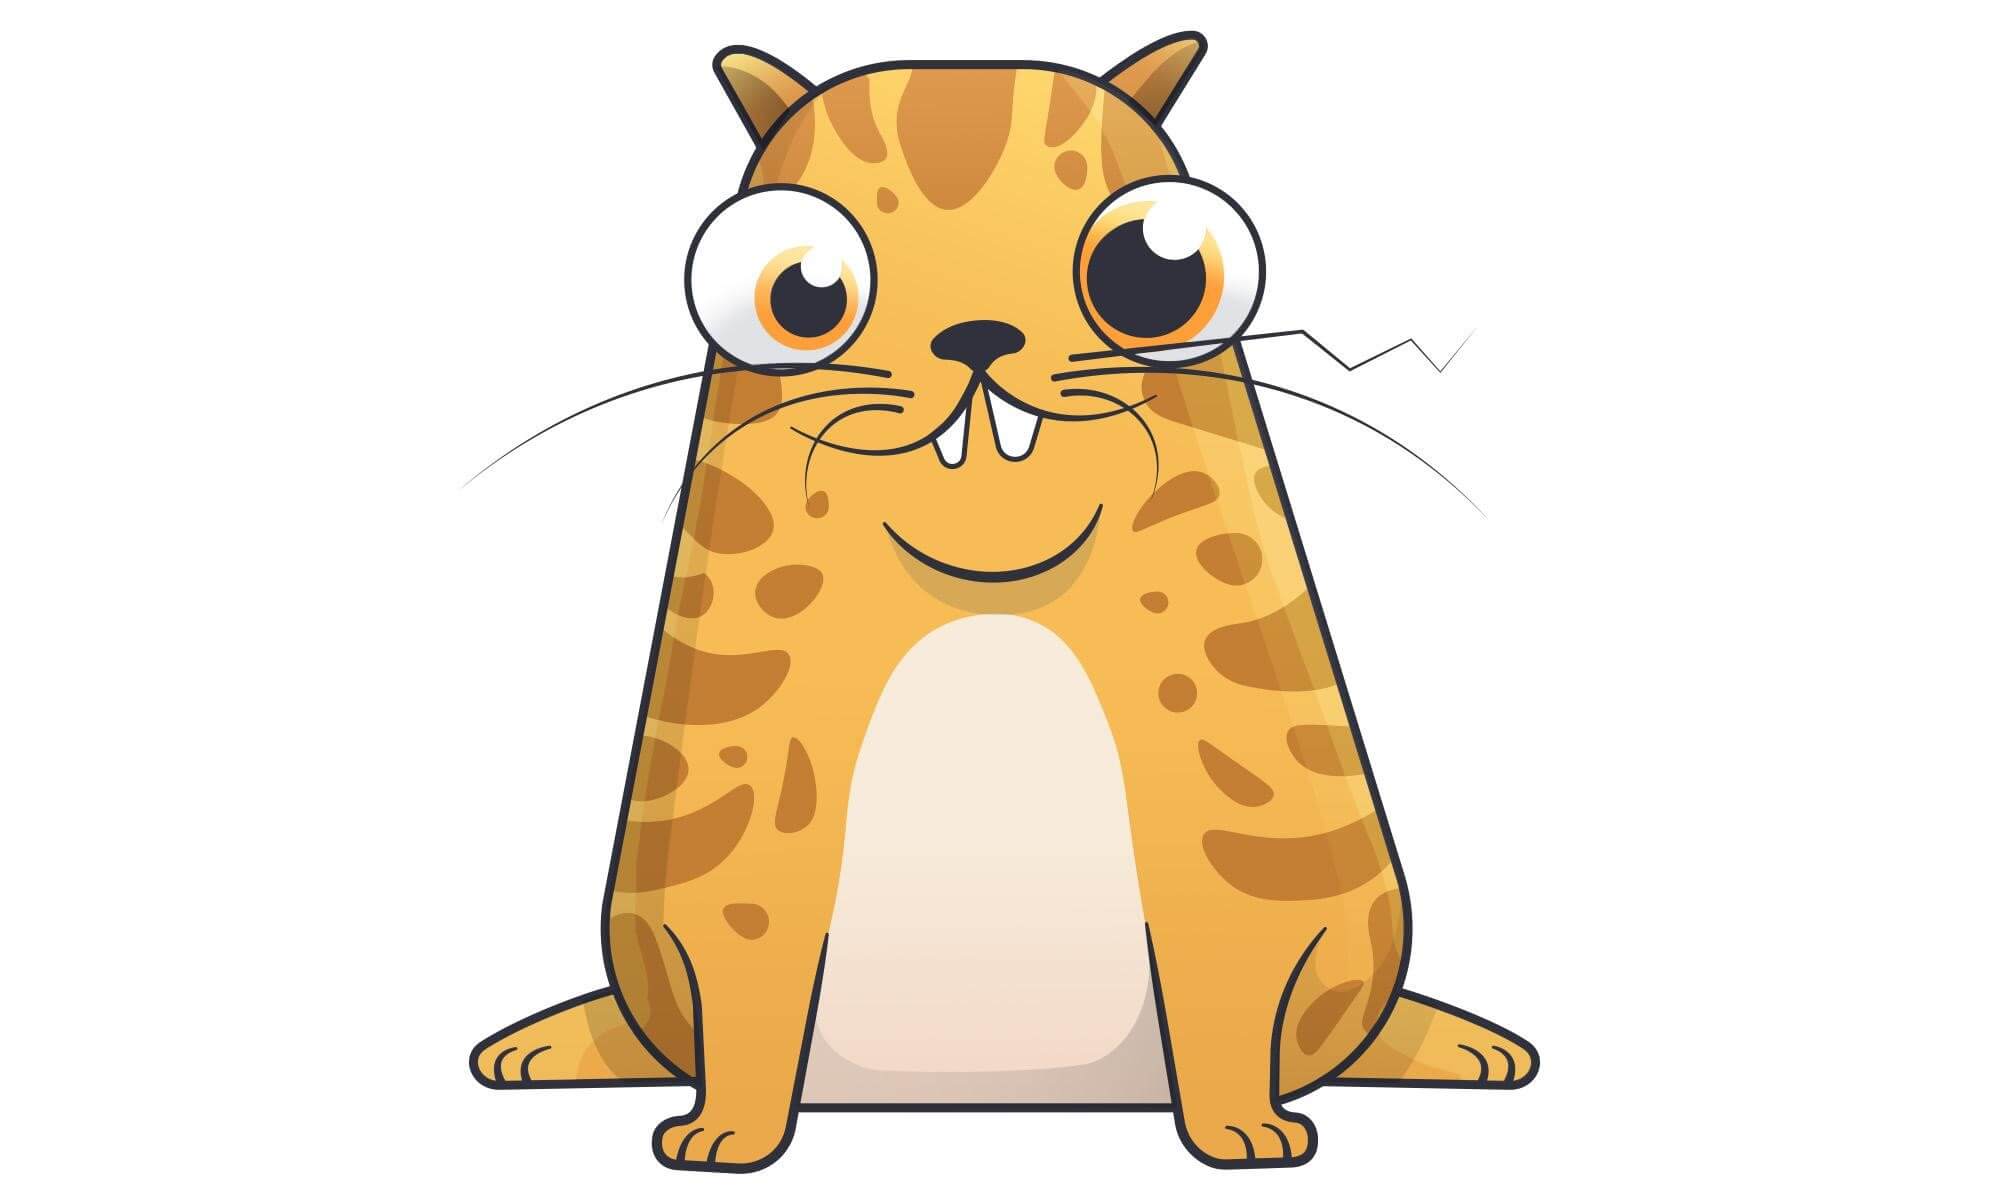 CryptoKitties are also one of the early examples of NFT art.